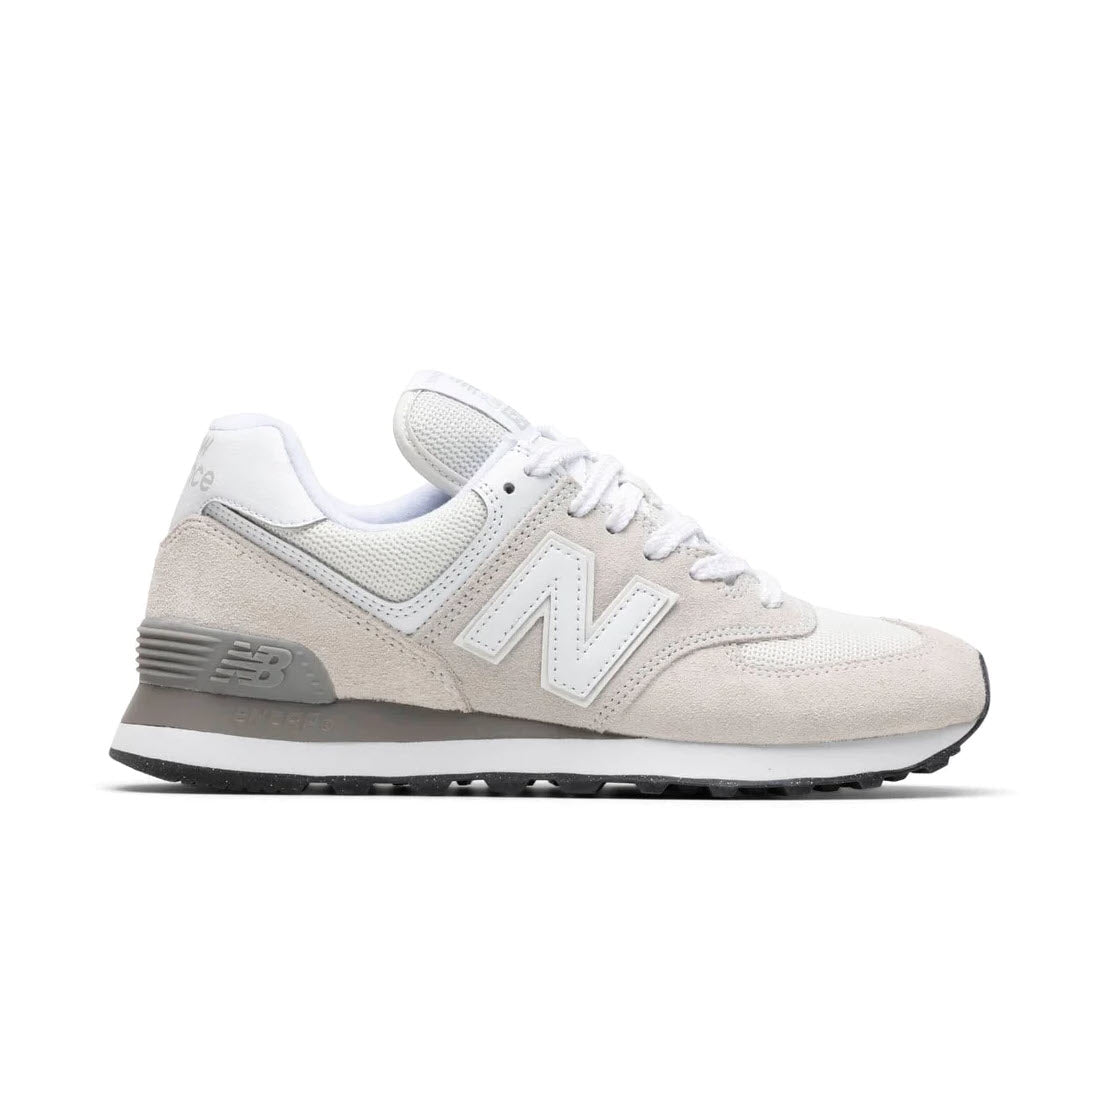 A New Balance 574 Nimbus Cloud sneaker displayed against a white background.